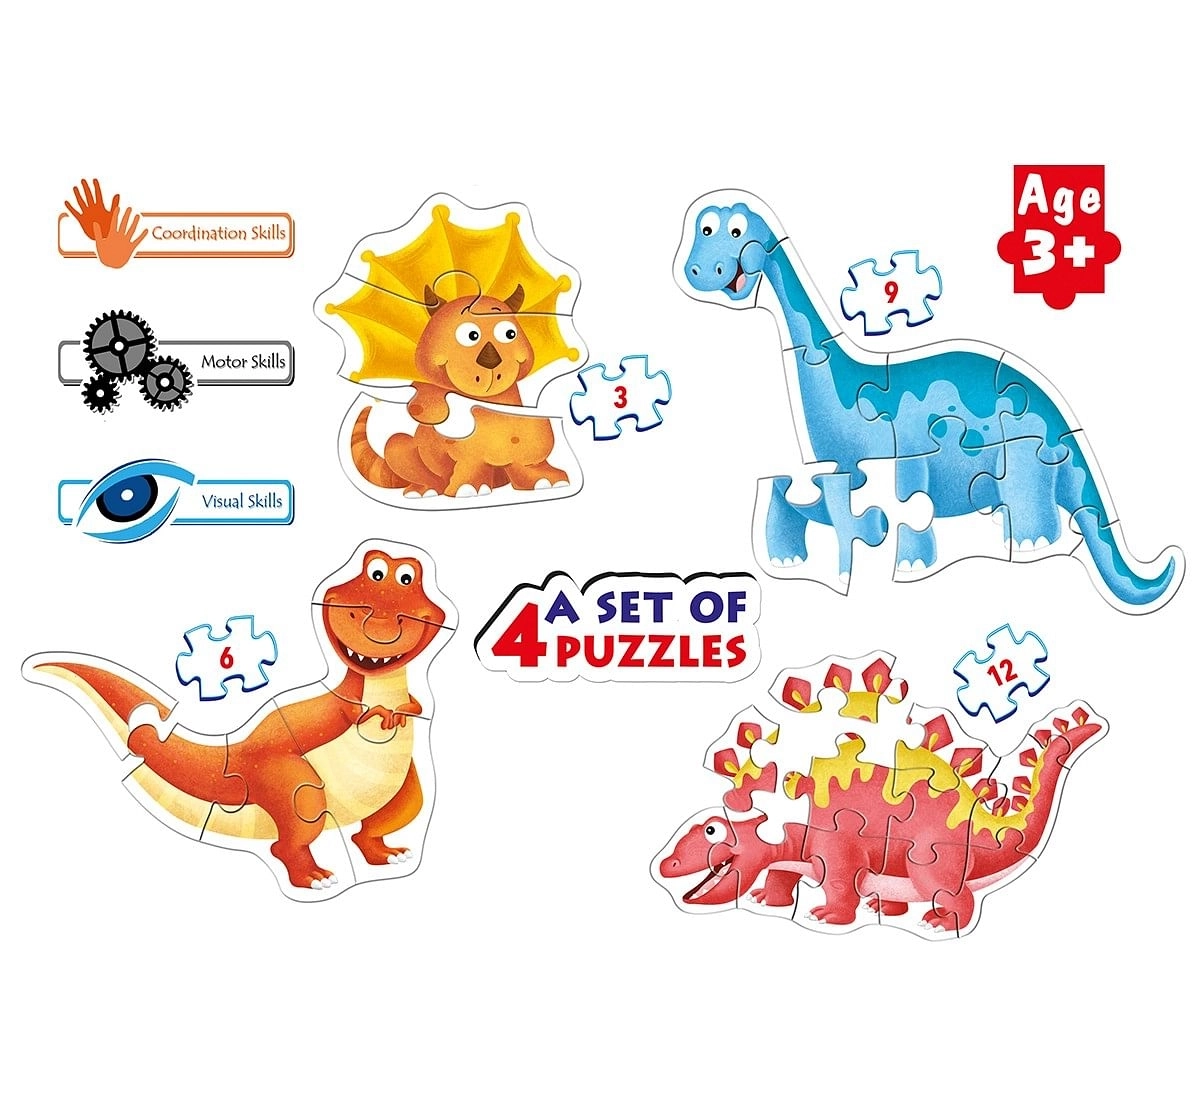 Frank Dinosaurs Shaped First Puzzle for Kids age 3Y+ 